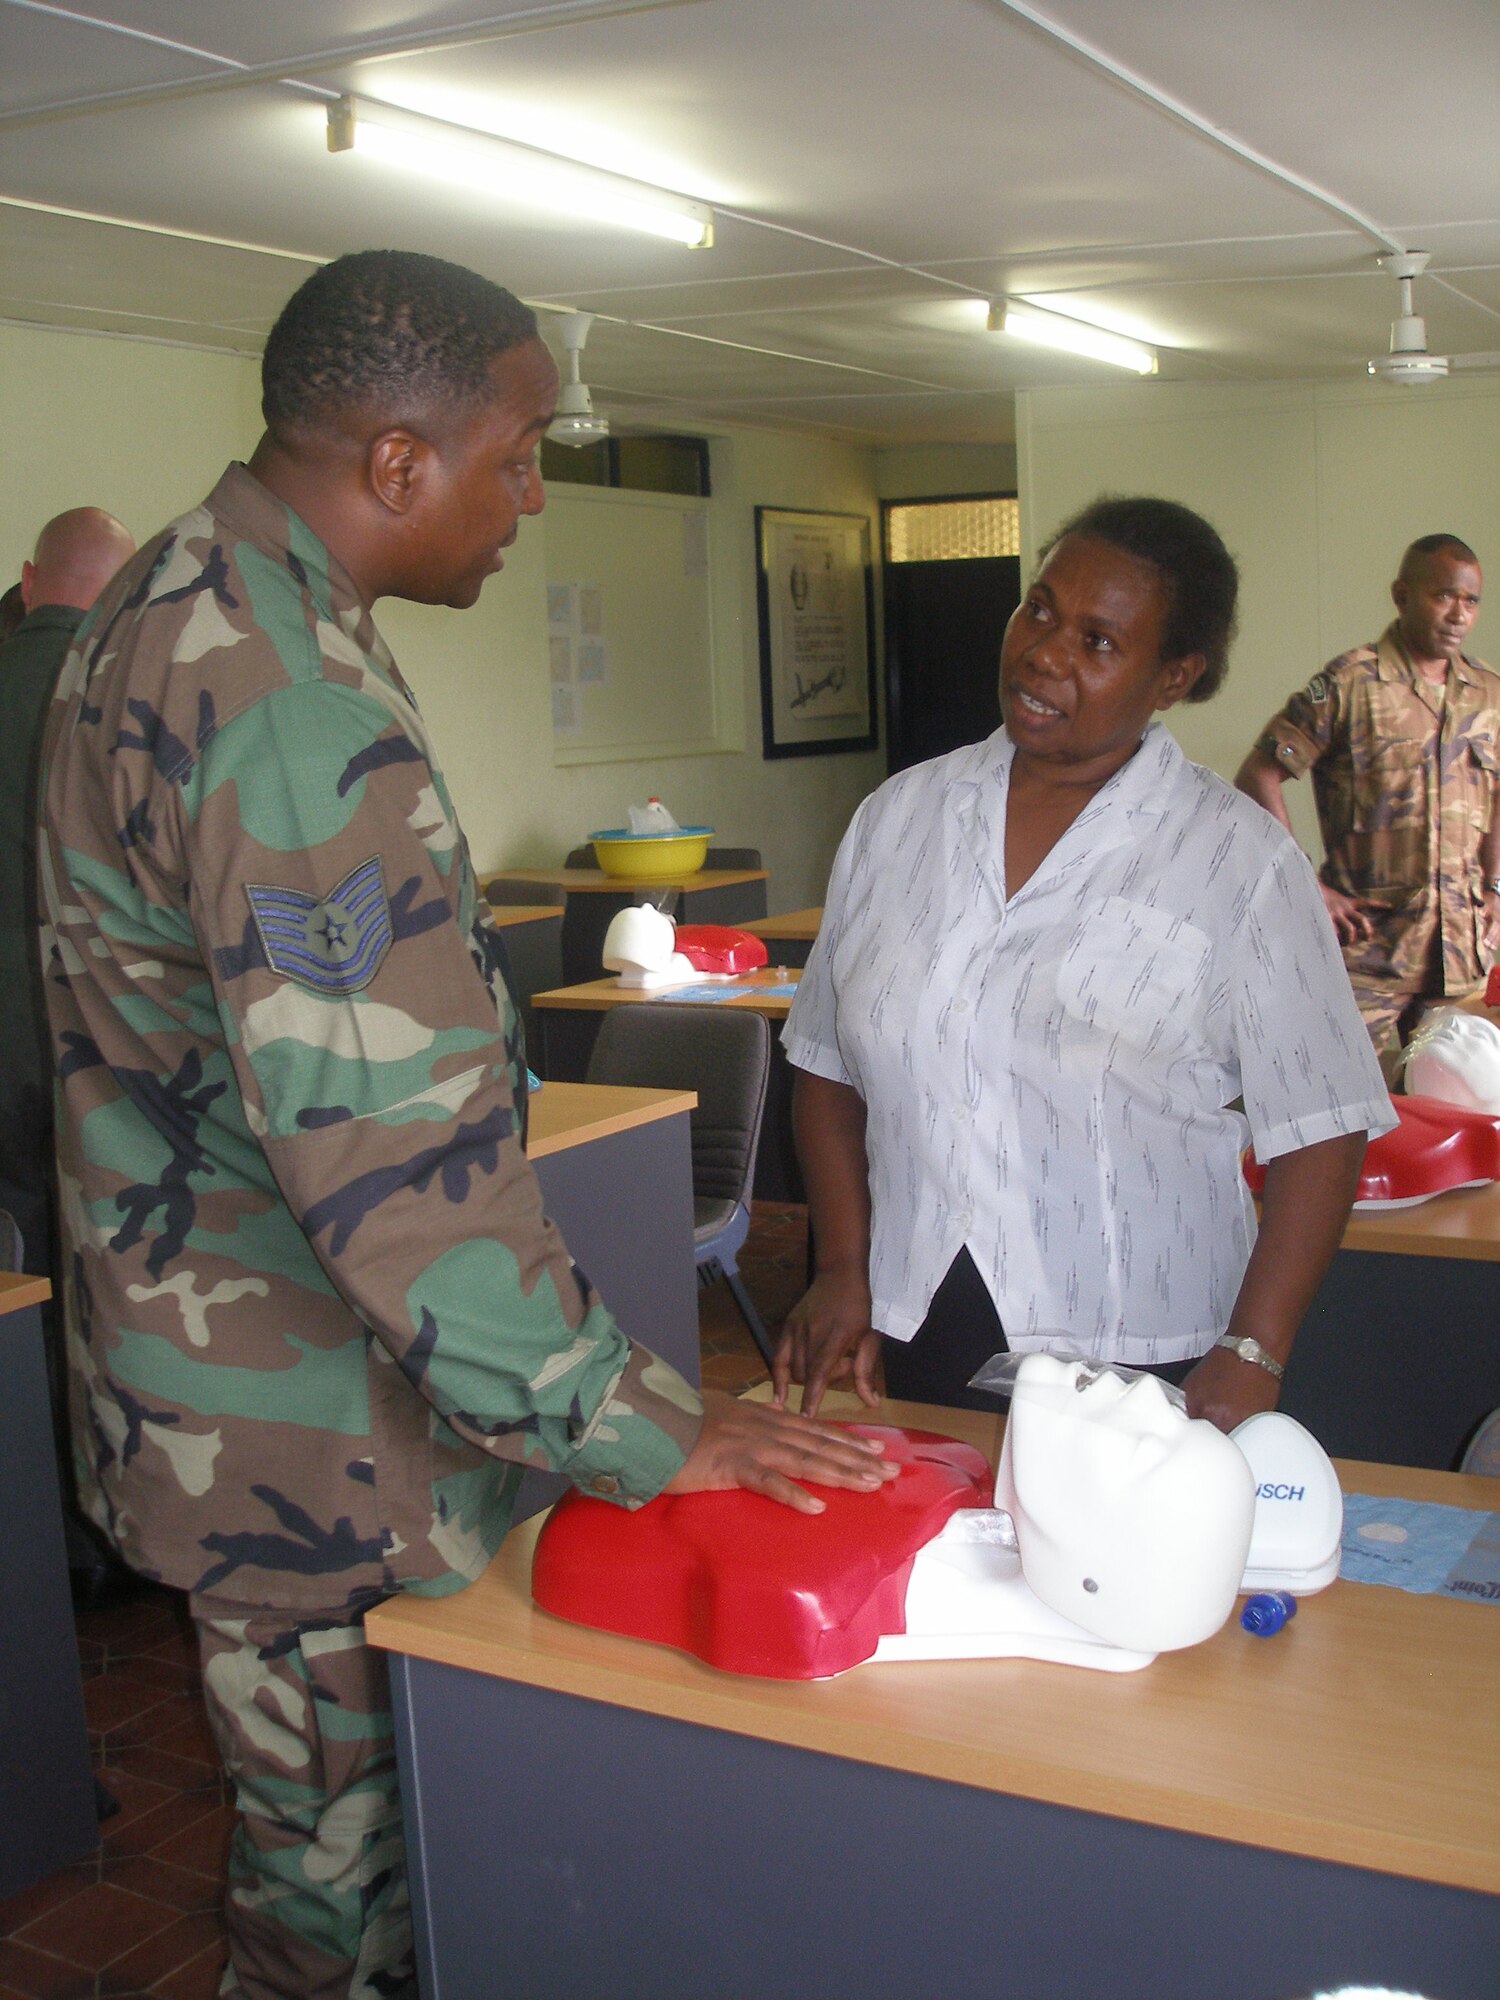 Tech. Sgt. William Parker, NCOIC, Clinical Medicine Flight, 15th Medical Group, gives Basic Life Support instruction during a 2-day "Train-the-trainer" class on Vanuatu. Sergeant Parker was part of a team that taught BLS and Self-Aid Buddy Care "train-the-trainer" courses to police, immigration and customs personnel, and paramedics on the island of Vanuatu. The team was part of the Oceania Humanitarian Assistance Mission that brought medical, dental and engineering personnel to perform civil assistance projects on Vanuatu, Nauru and Kiribati July 20-30. ((U.S. Air Force Photo by Master Sgt. Bob Woods)